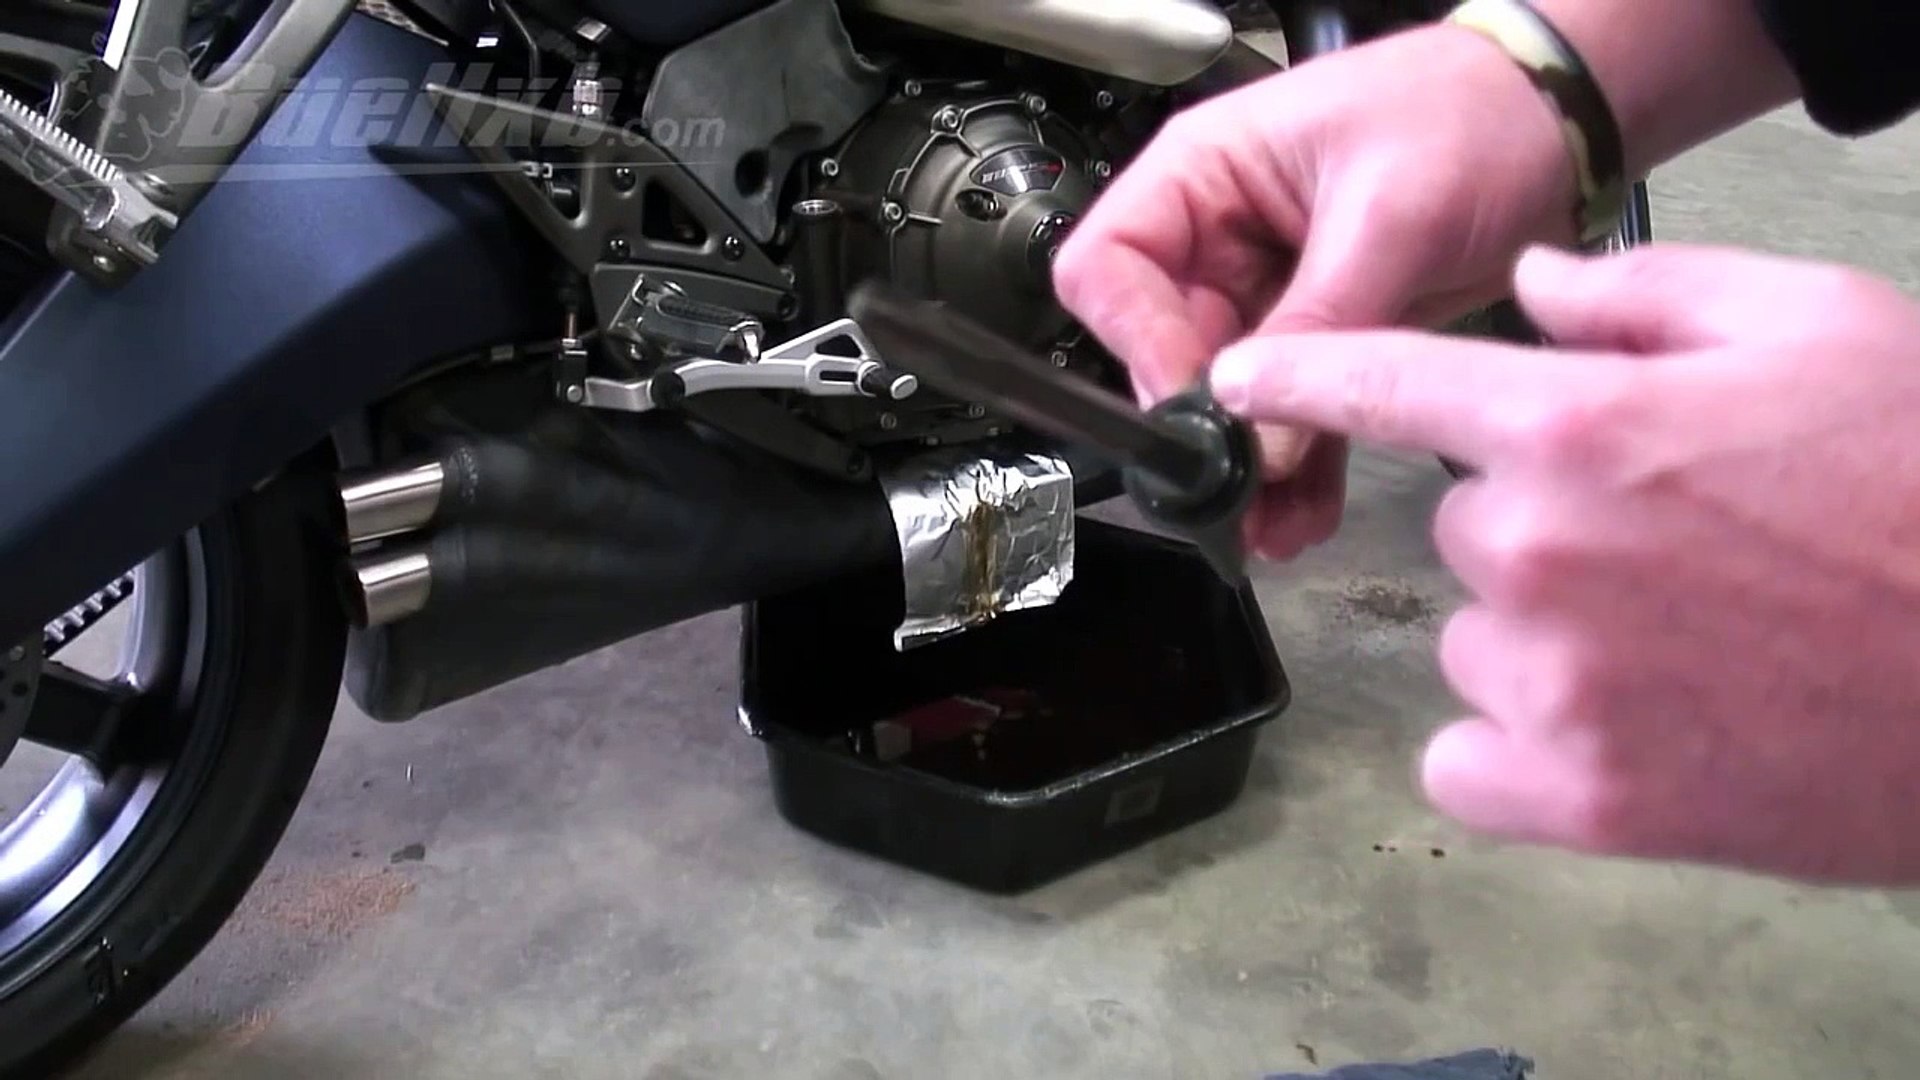 Buell 1125r, 1125cr Oil Change How To Video - video Dailymotion